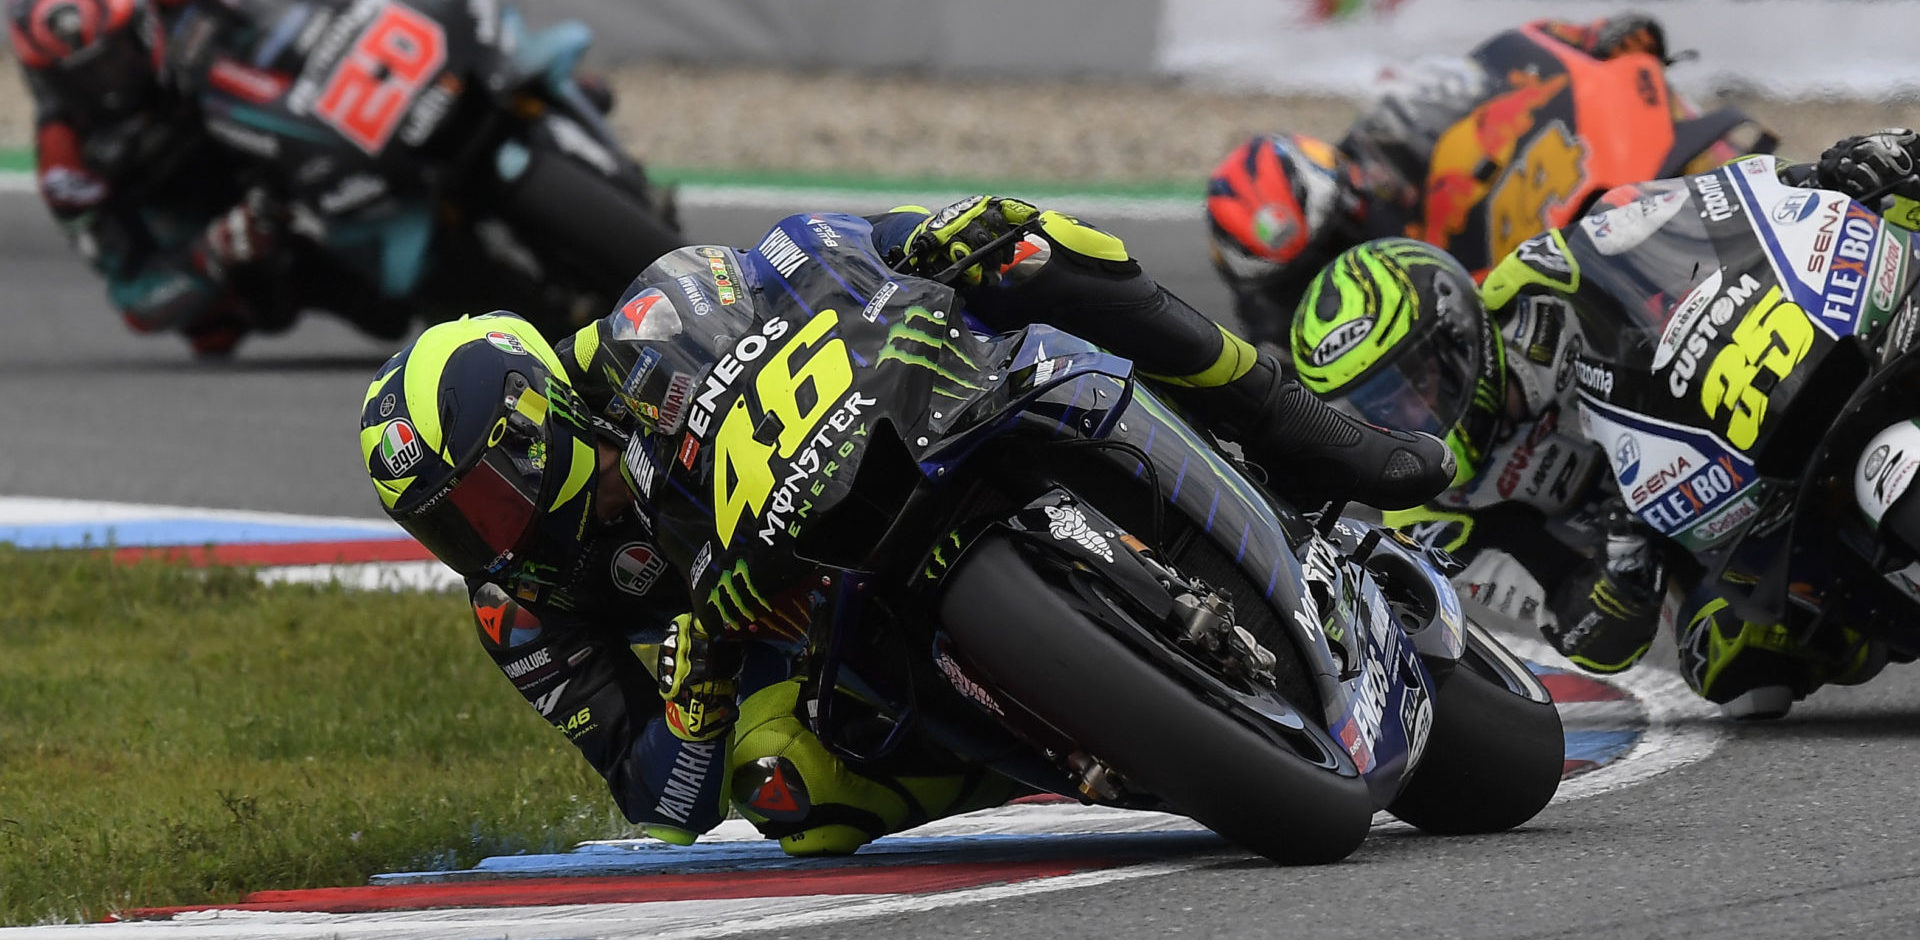 MotoGP: Brno Is A Special Place For Rossi - Roadracing ...